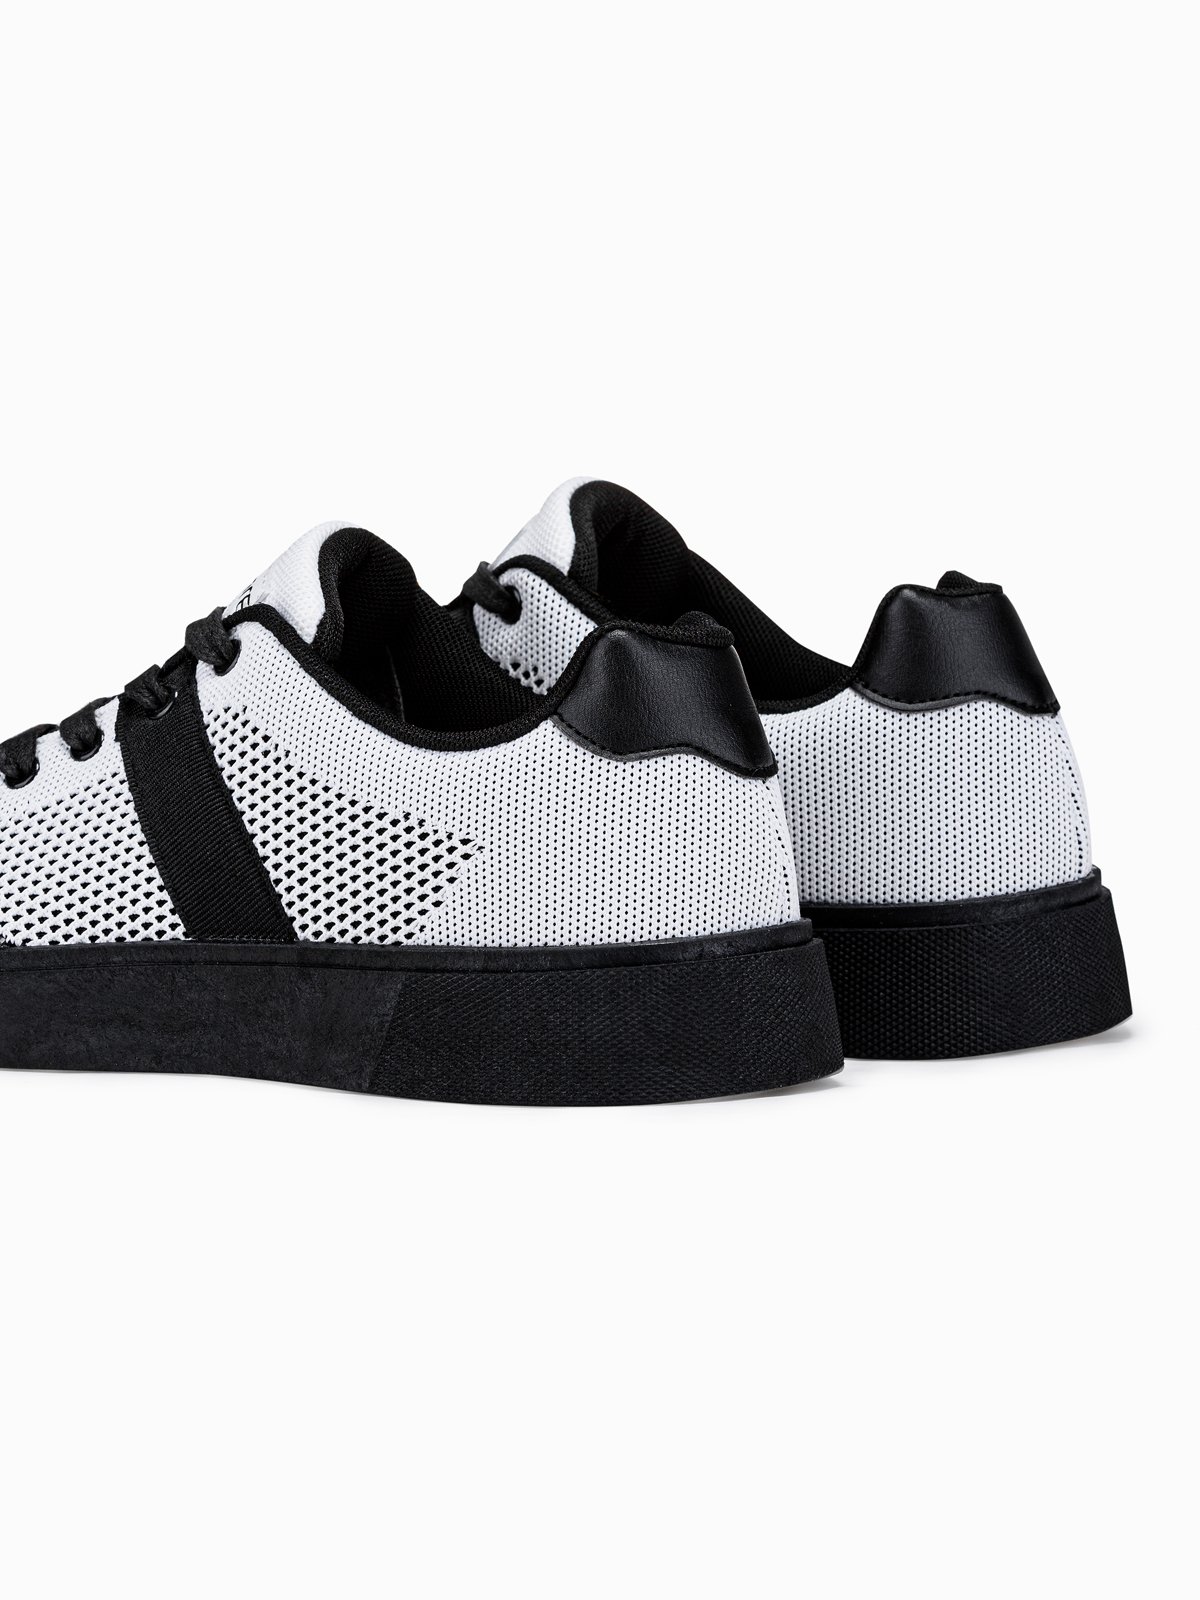 mens white and black trainers